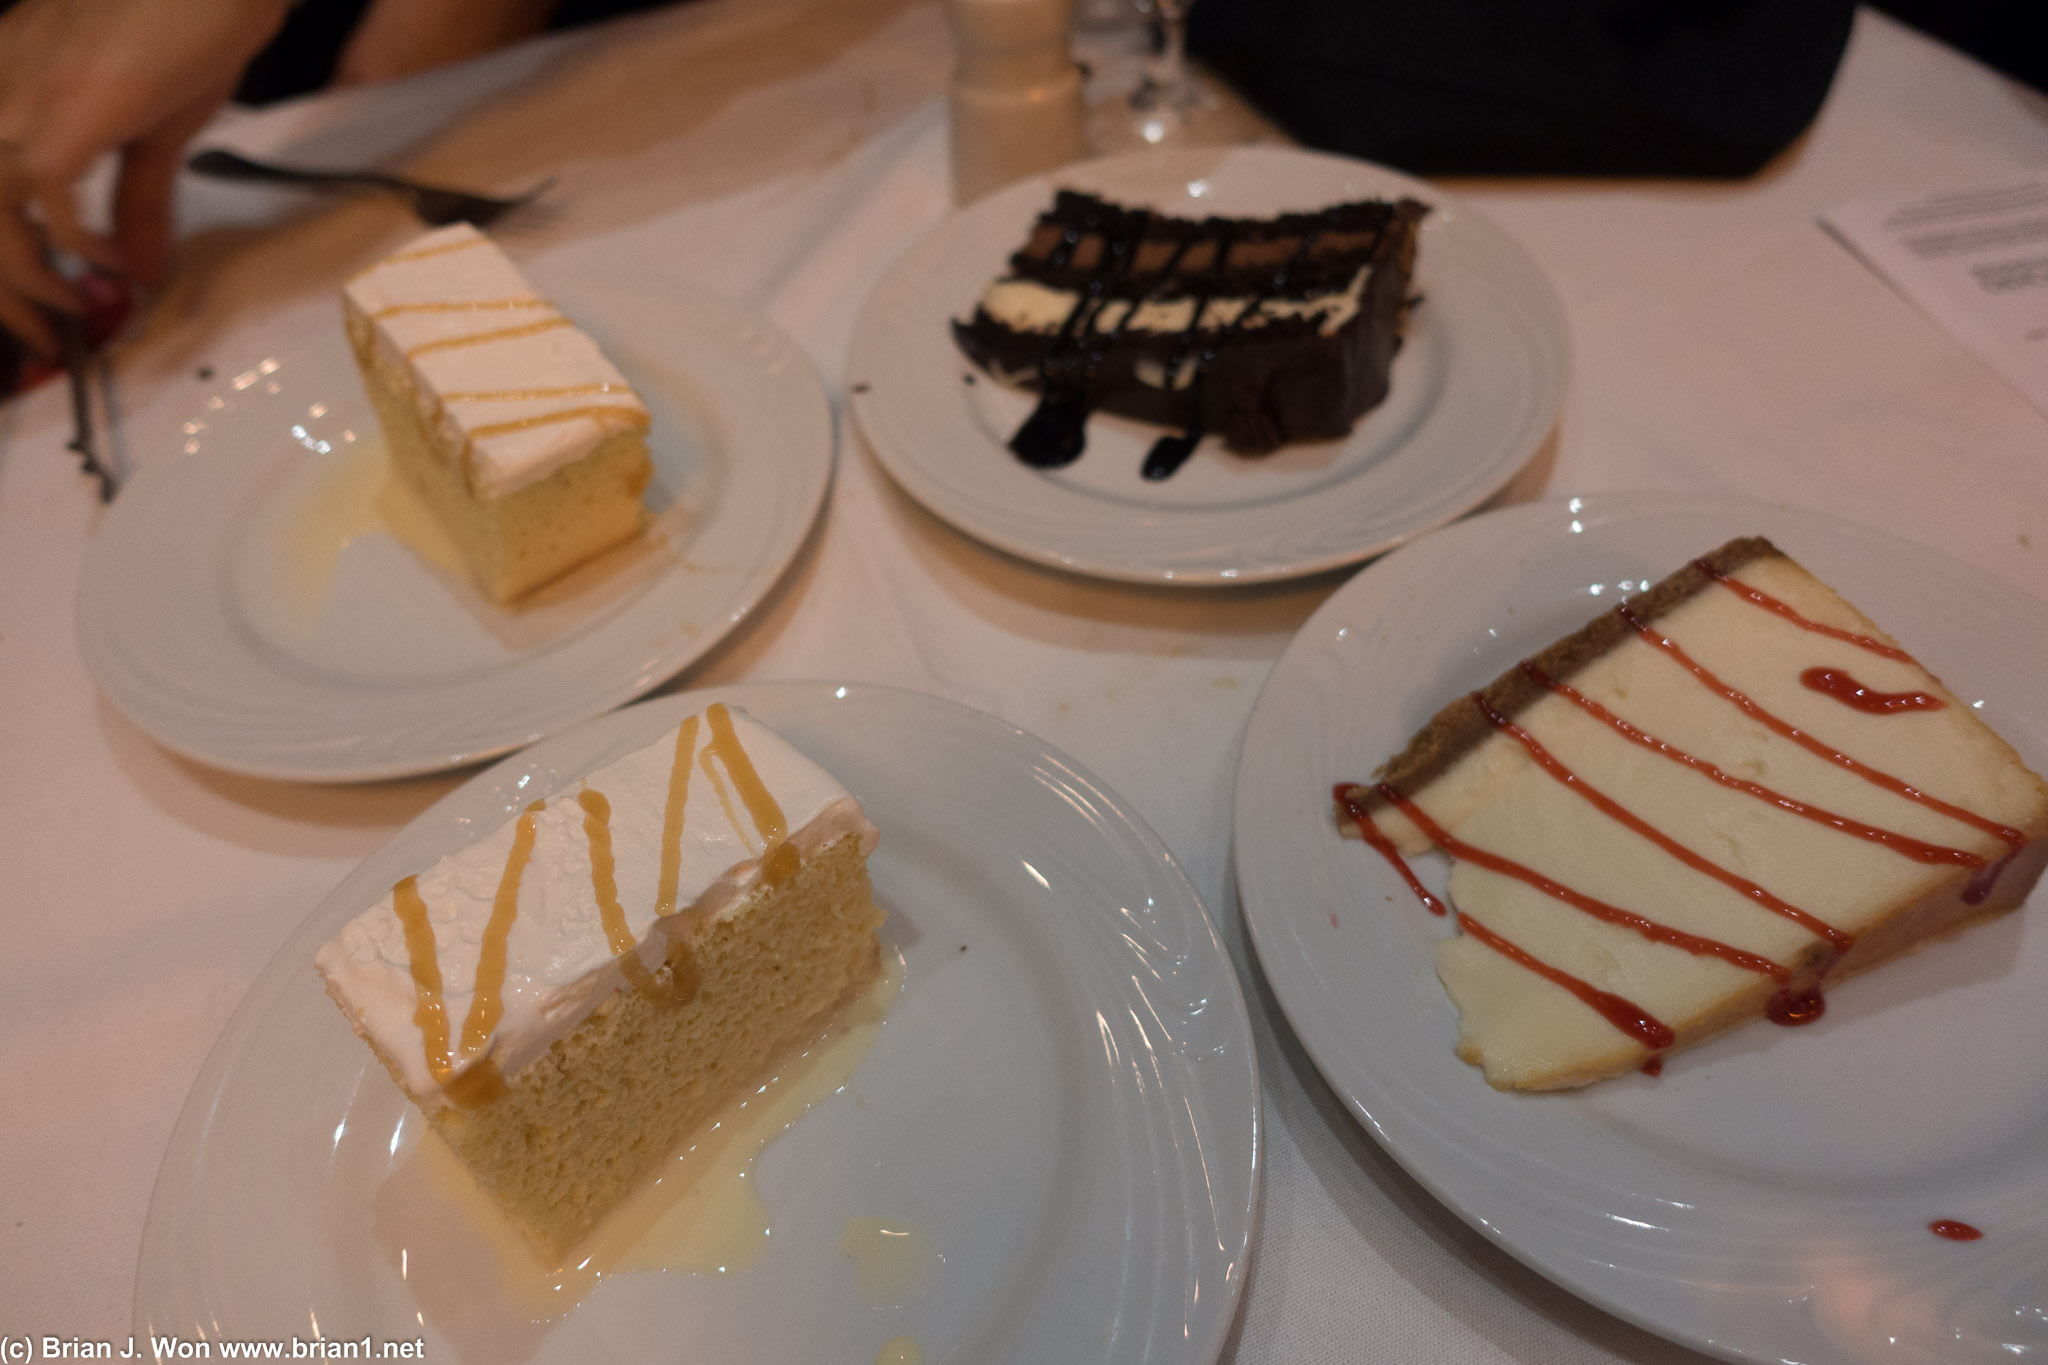 2x tres leches (not bad), cheesecake (nom), and chocolate cake (meh).